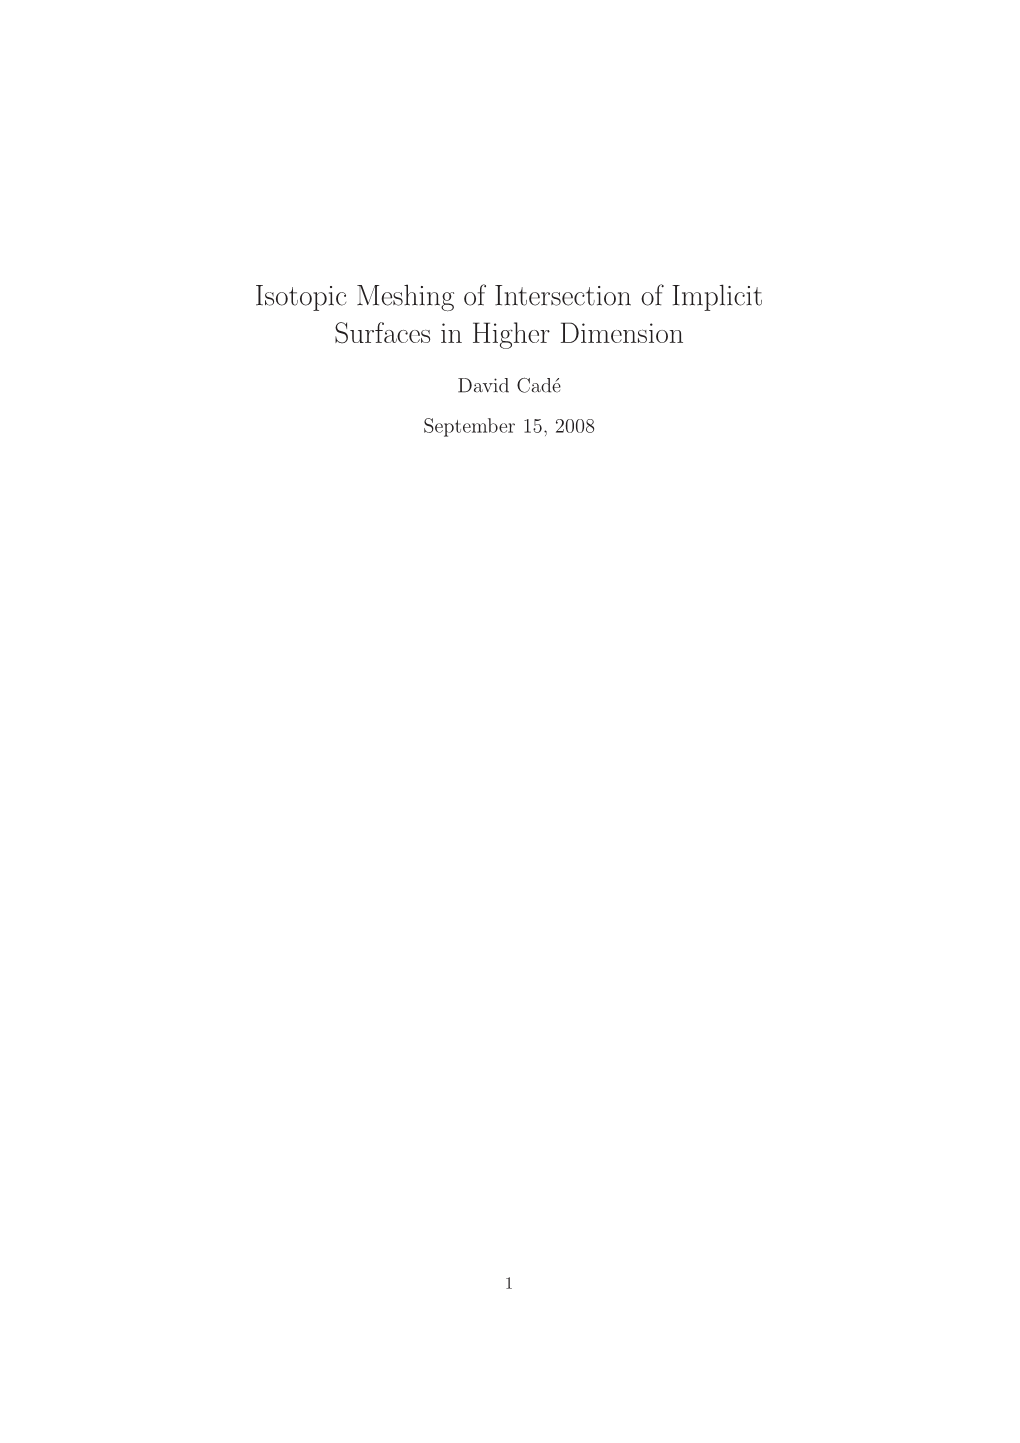 Isotopic Meshing of Intersection of Implicit Surfaces in Higher Dimension